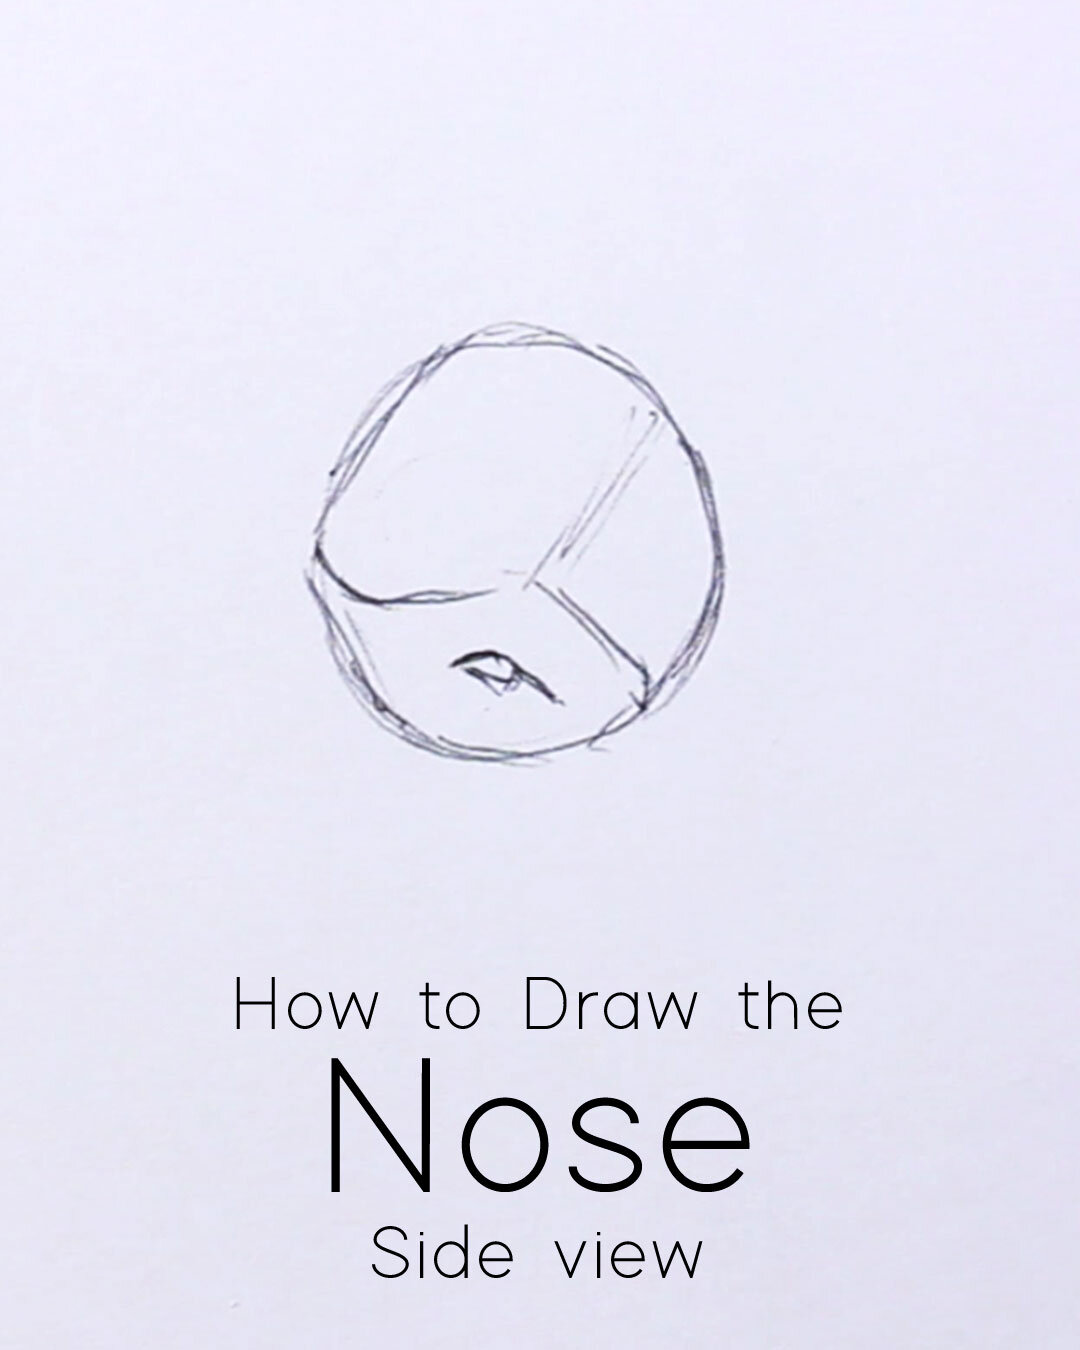 How to Draw a Nose from side view without Shading Step 1 &amp; 2 #anatomy #nose #drawing #arttutorial